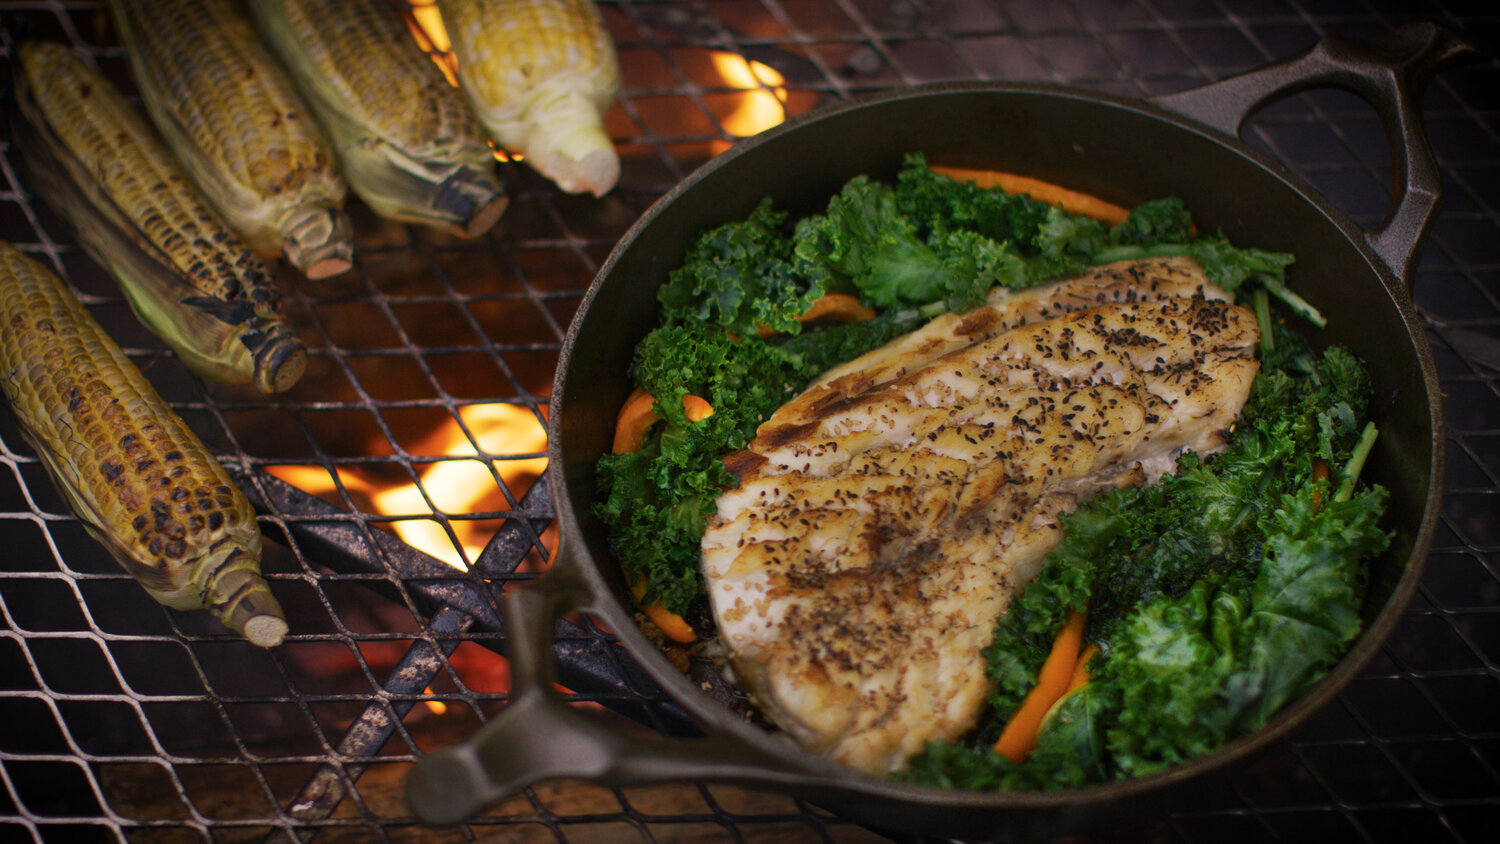 Cast iron cookware is so versatile - it can be used on any cooking surface, even the grill or an open flame.